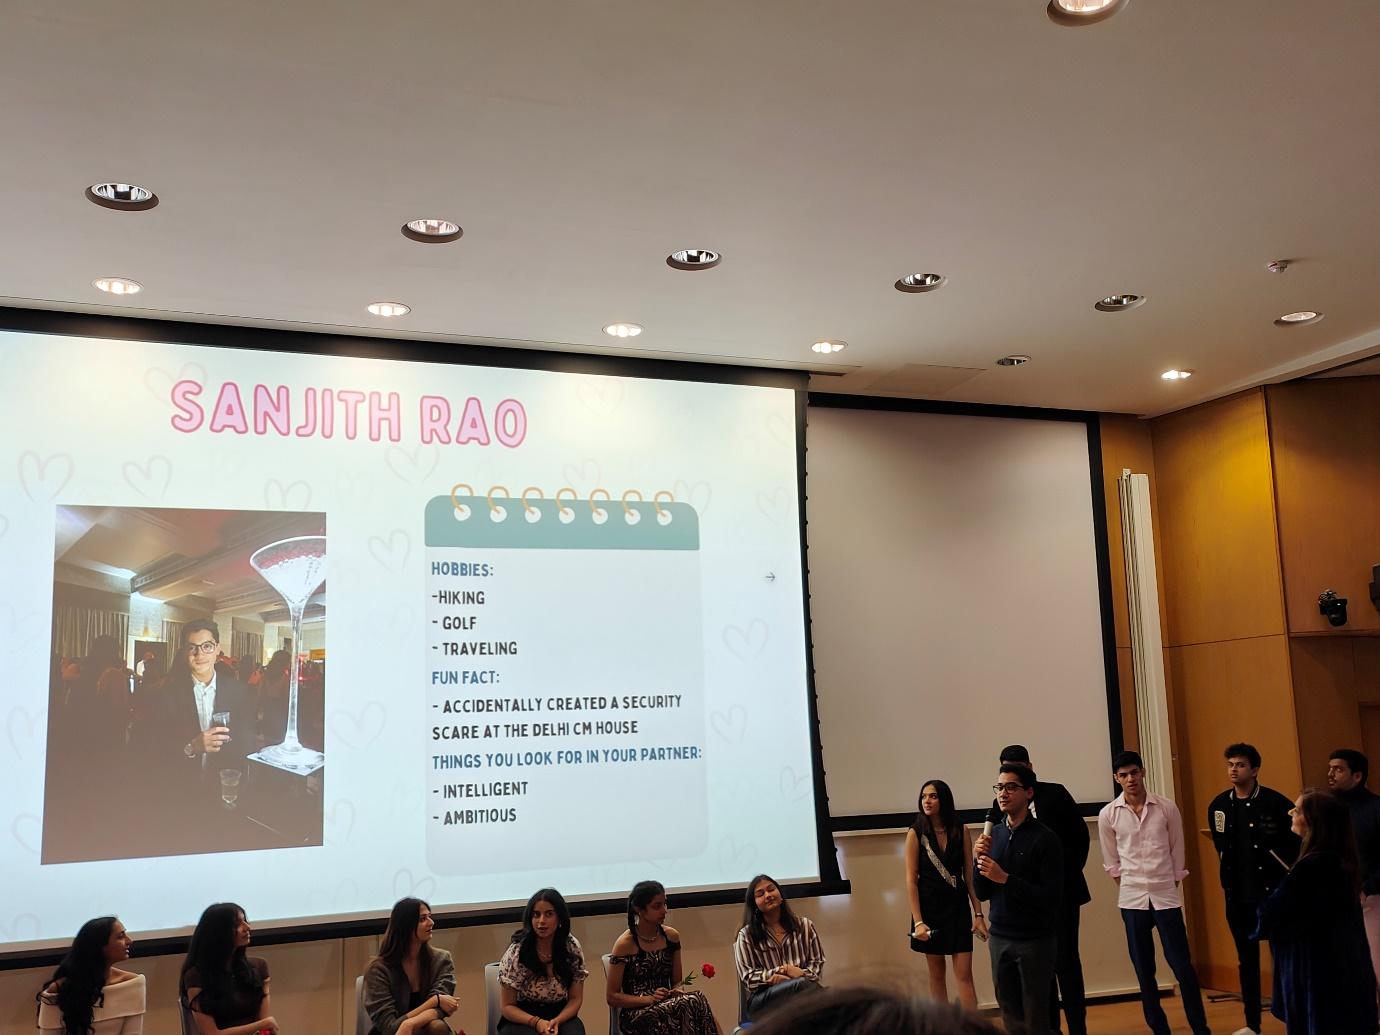 A group of people standing in front of a large screen

Description automatically generated